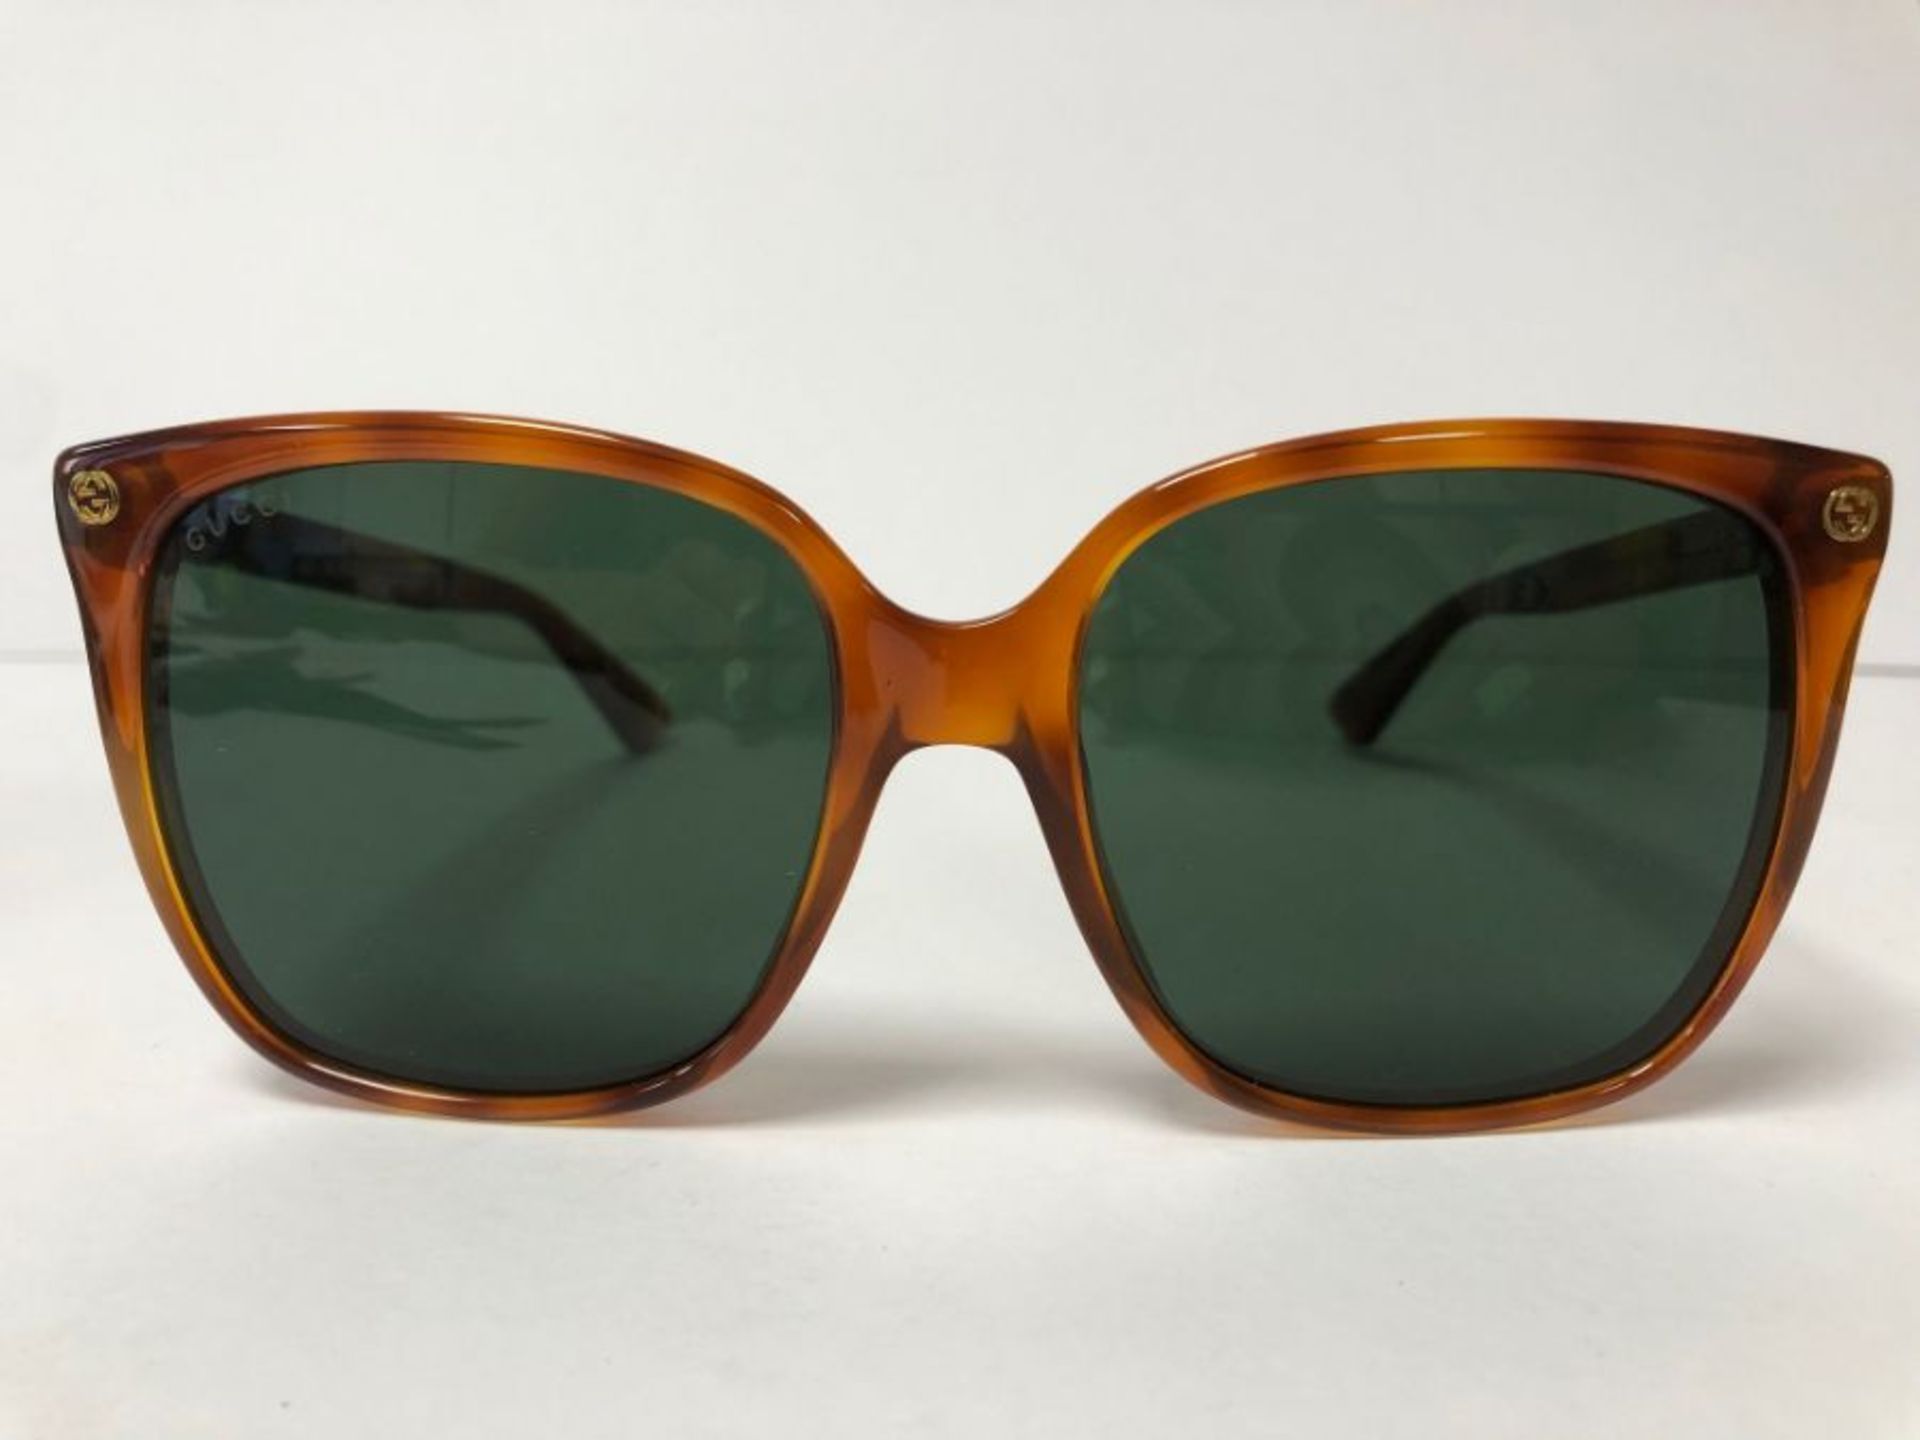 Gucci Men's Sunglasses, Mens, GG0689S Tortoise Shell with case - Image 7 of 7